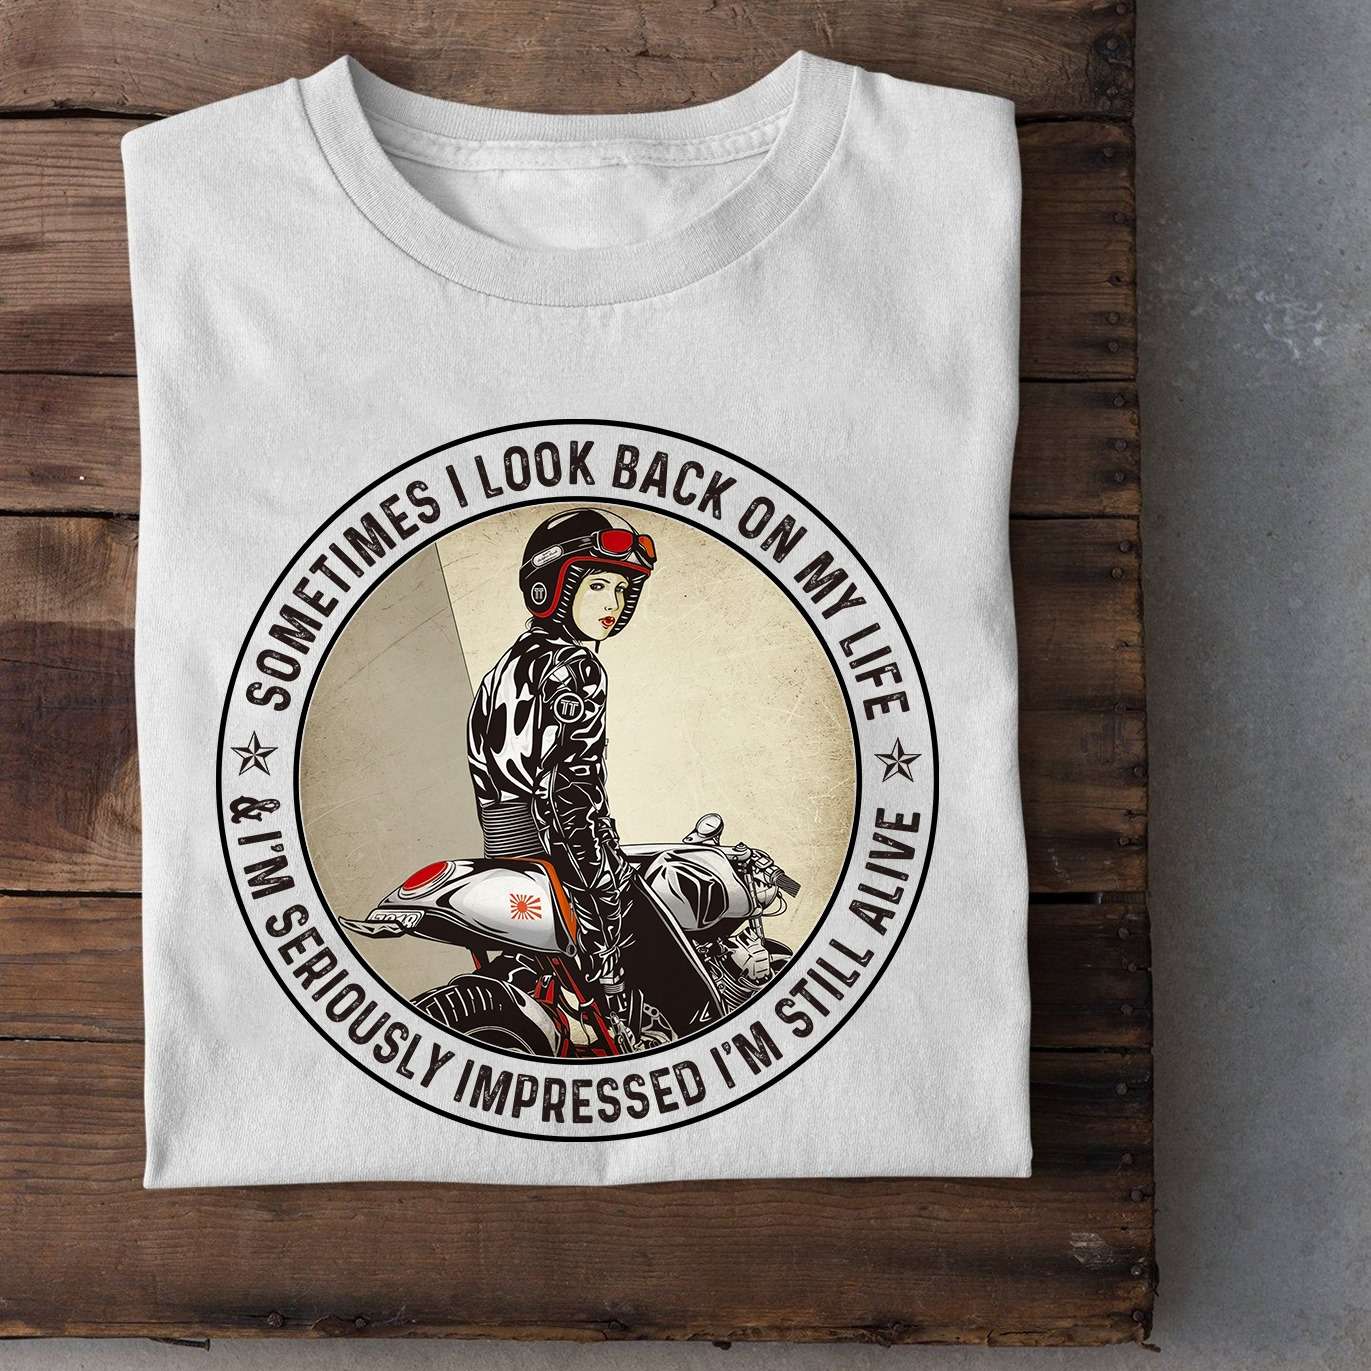 Sometimes I look back on my life, I'm seriously impressed I'm still alive - Woman riding motorcycle